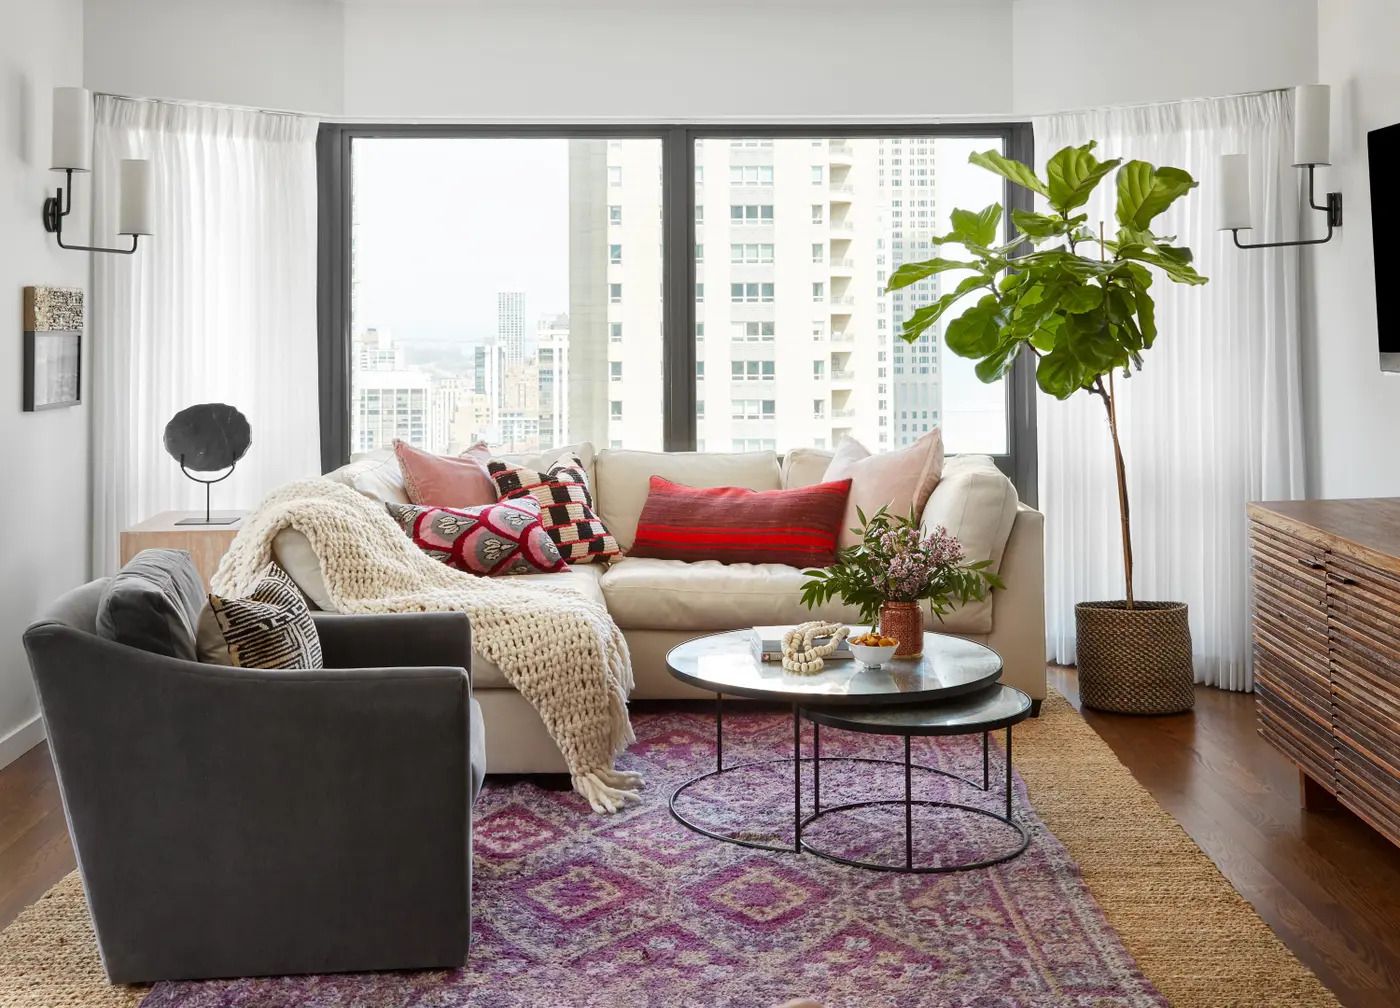 42 Unique Rug Ideas For A Small Living Room